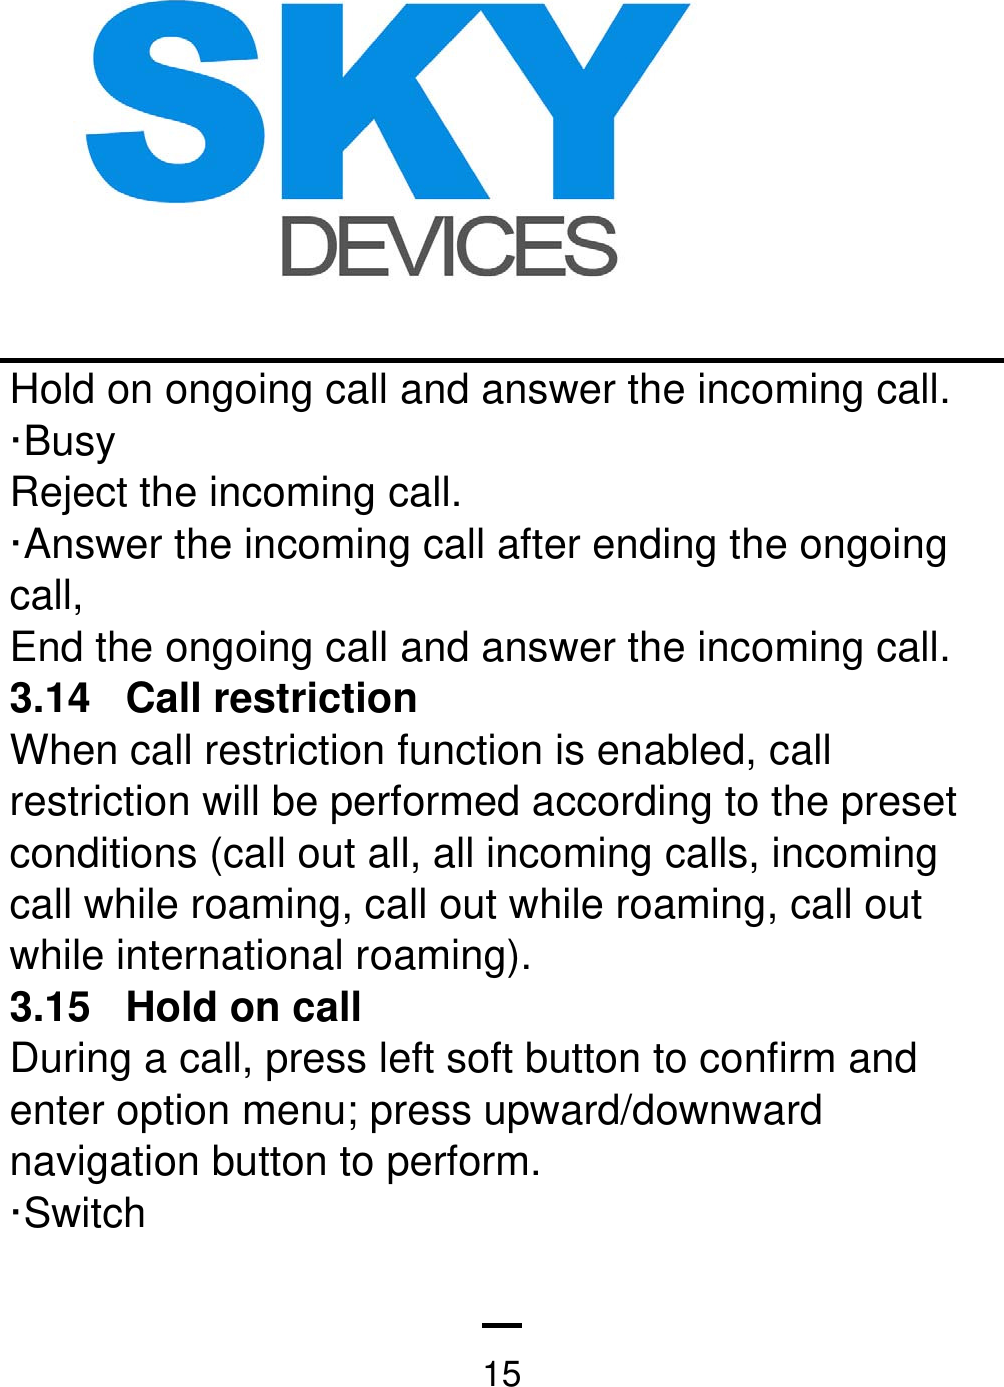   15Hold on ongoing call and answer the incoming call. ·Busy  Reject the incoming call.   ·Answer the incoming call after ending the ongoing call, End the ongoing call and answer the incoming call. 3.14 Call restriction  When call restriction function is enabled, call restriction will be performed according to the preset conditions (call out all, all incoming calls, incoming call while roaming, call out while roaming, call out while international roaming).   3.15  Hold on call   During a call, press left soft button to confirm and enter option menu; press upward/downward navigation button to perform. ·Switch   